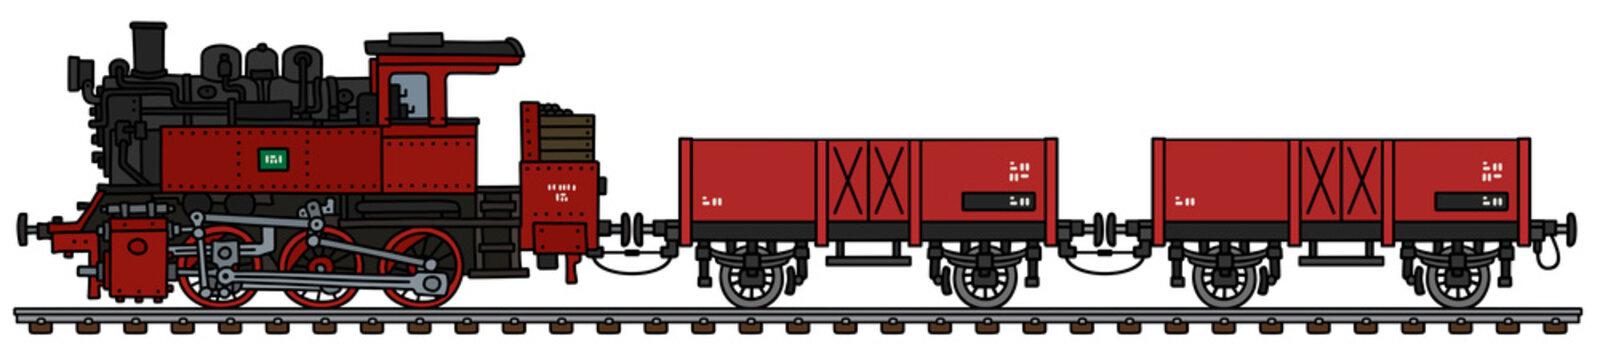 The vectorized hand drawing of a vintage red freight steam train